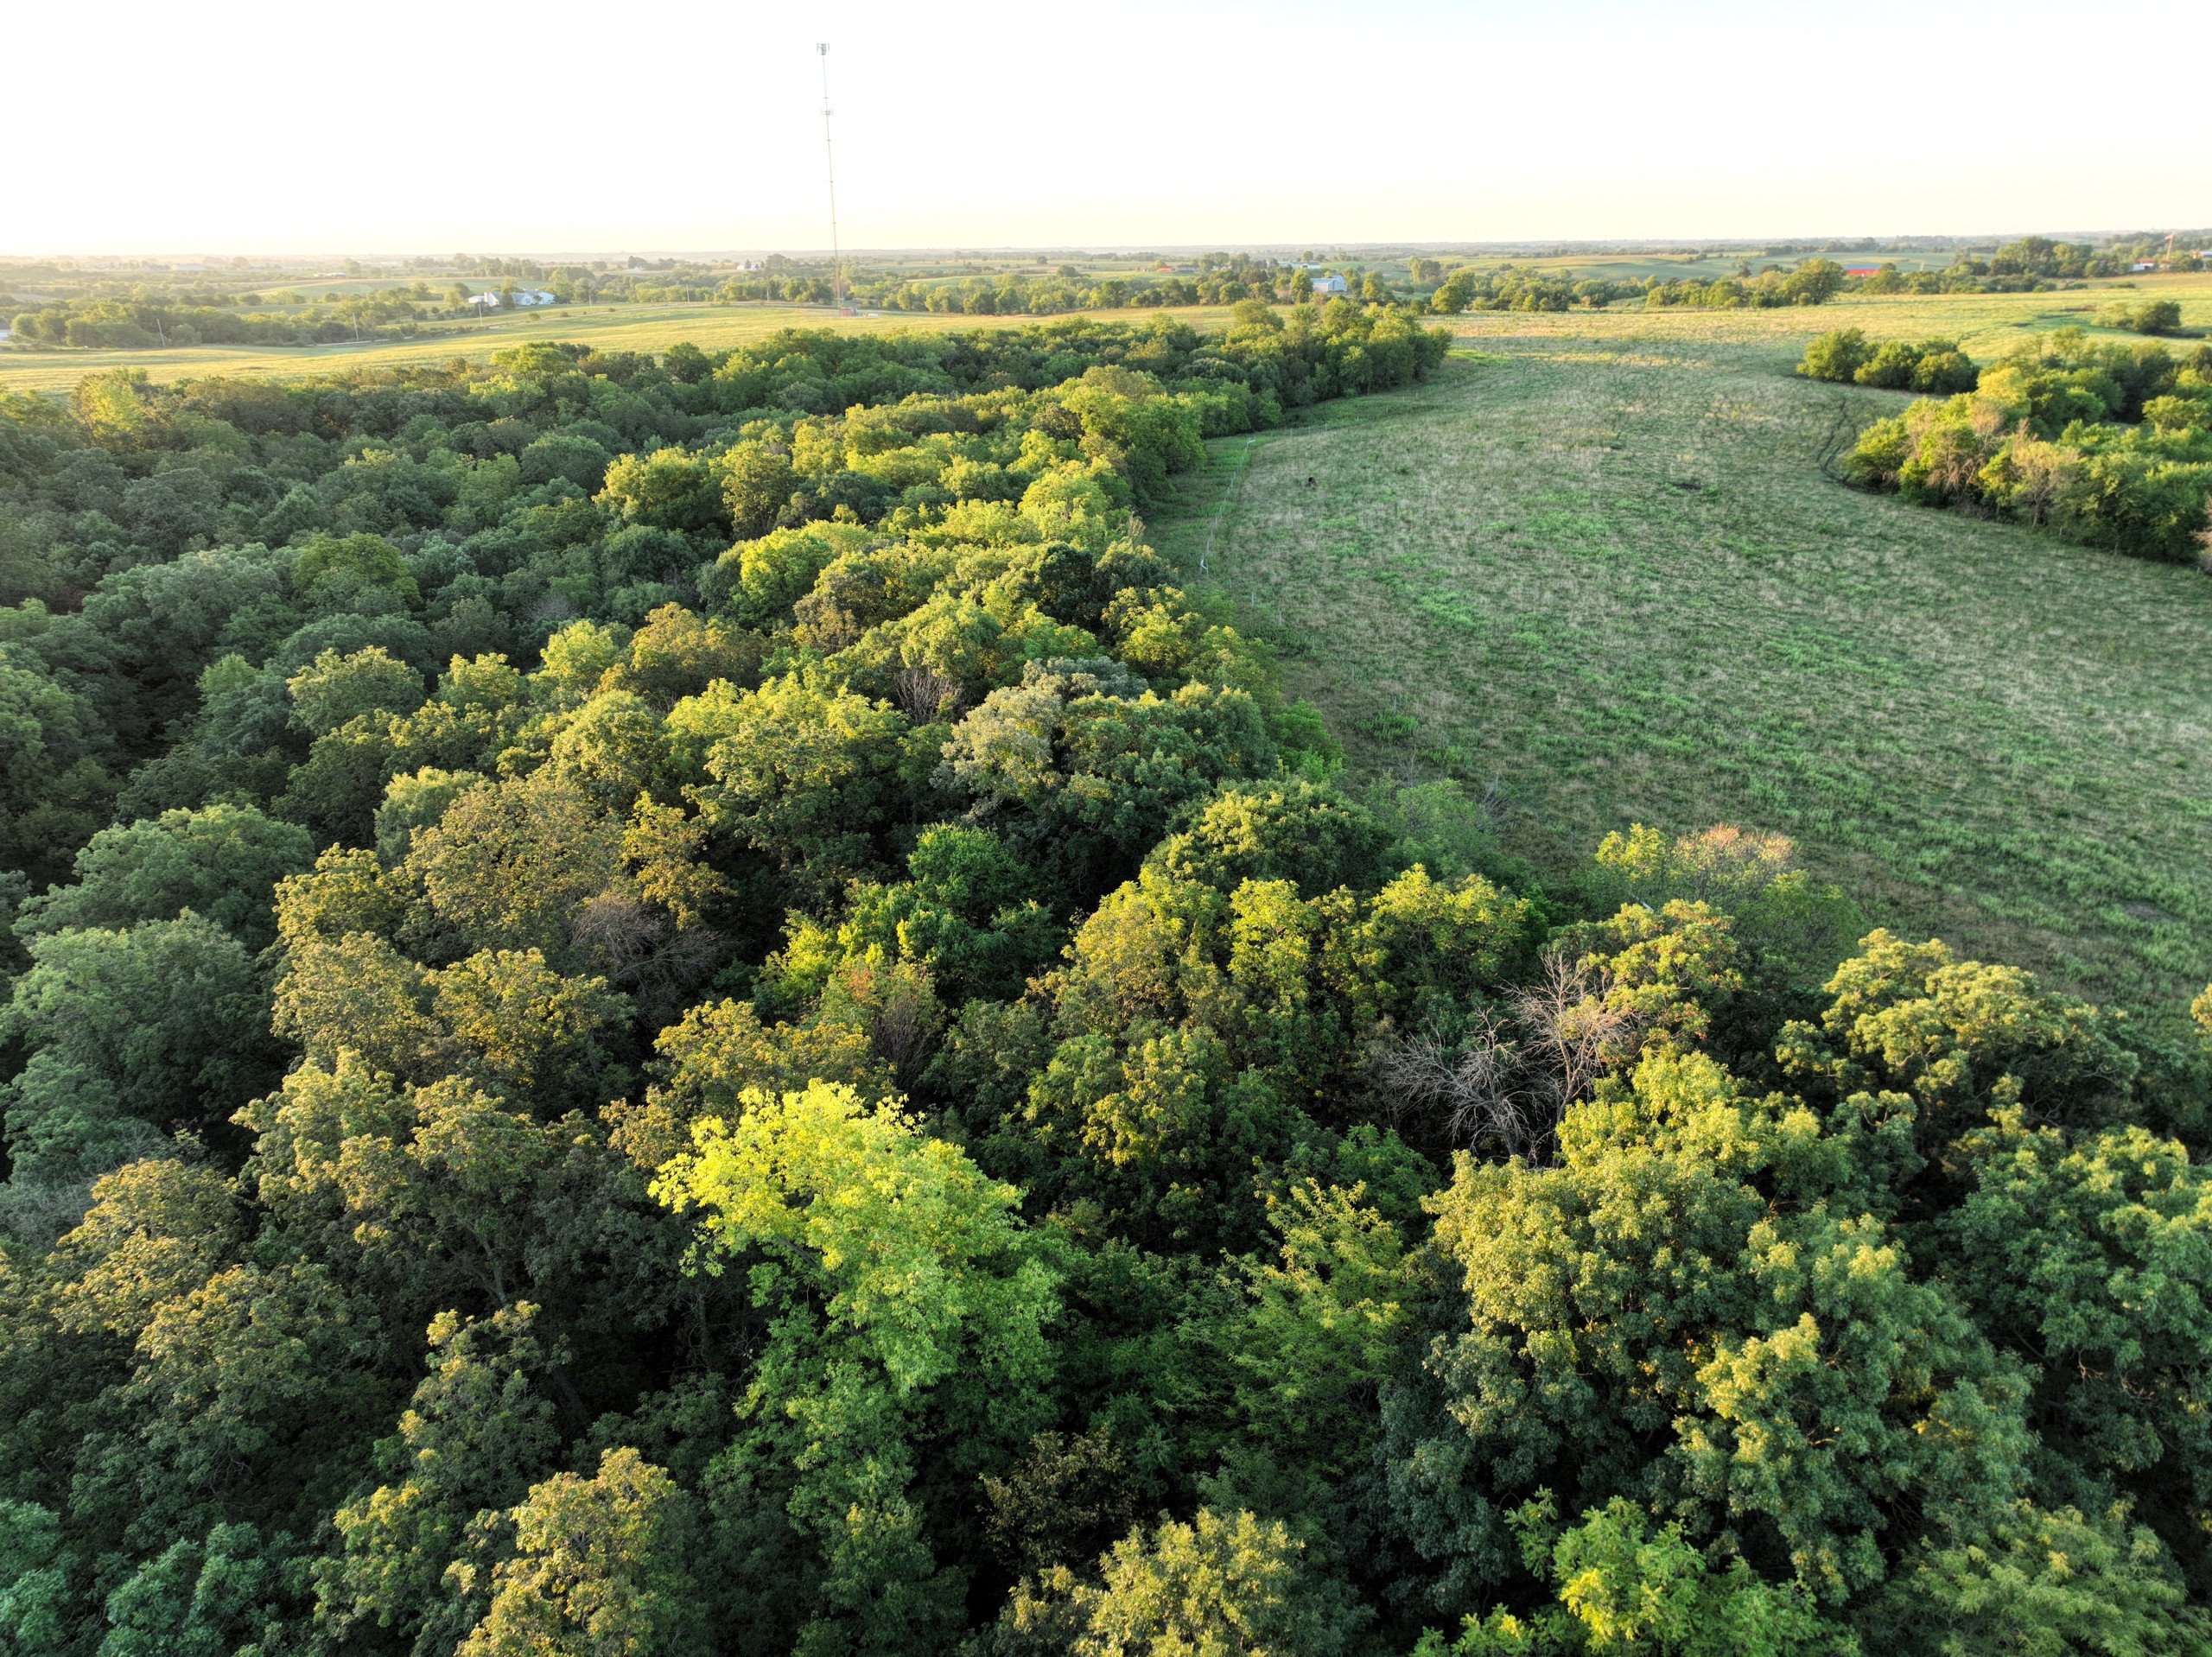 residential-land-warren-county-iowa-148-acres-listing-number-16390-7-2.jpg